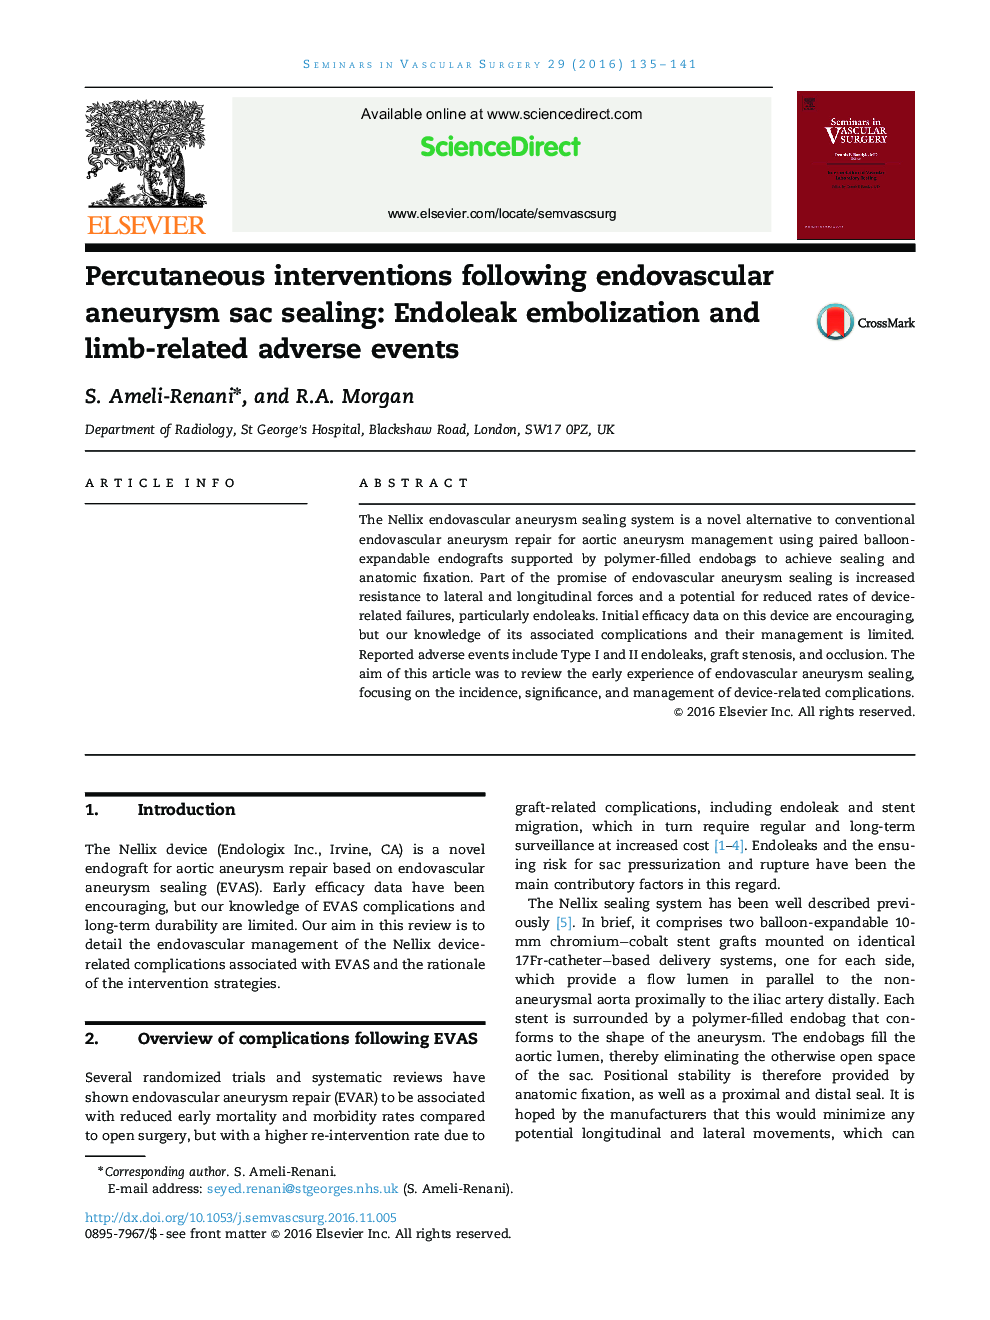 Percutaneous interventions following endovascular aneurysm sac sealing: Endoleak embolization and limb-related adverse events